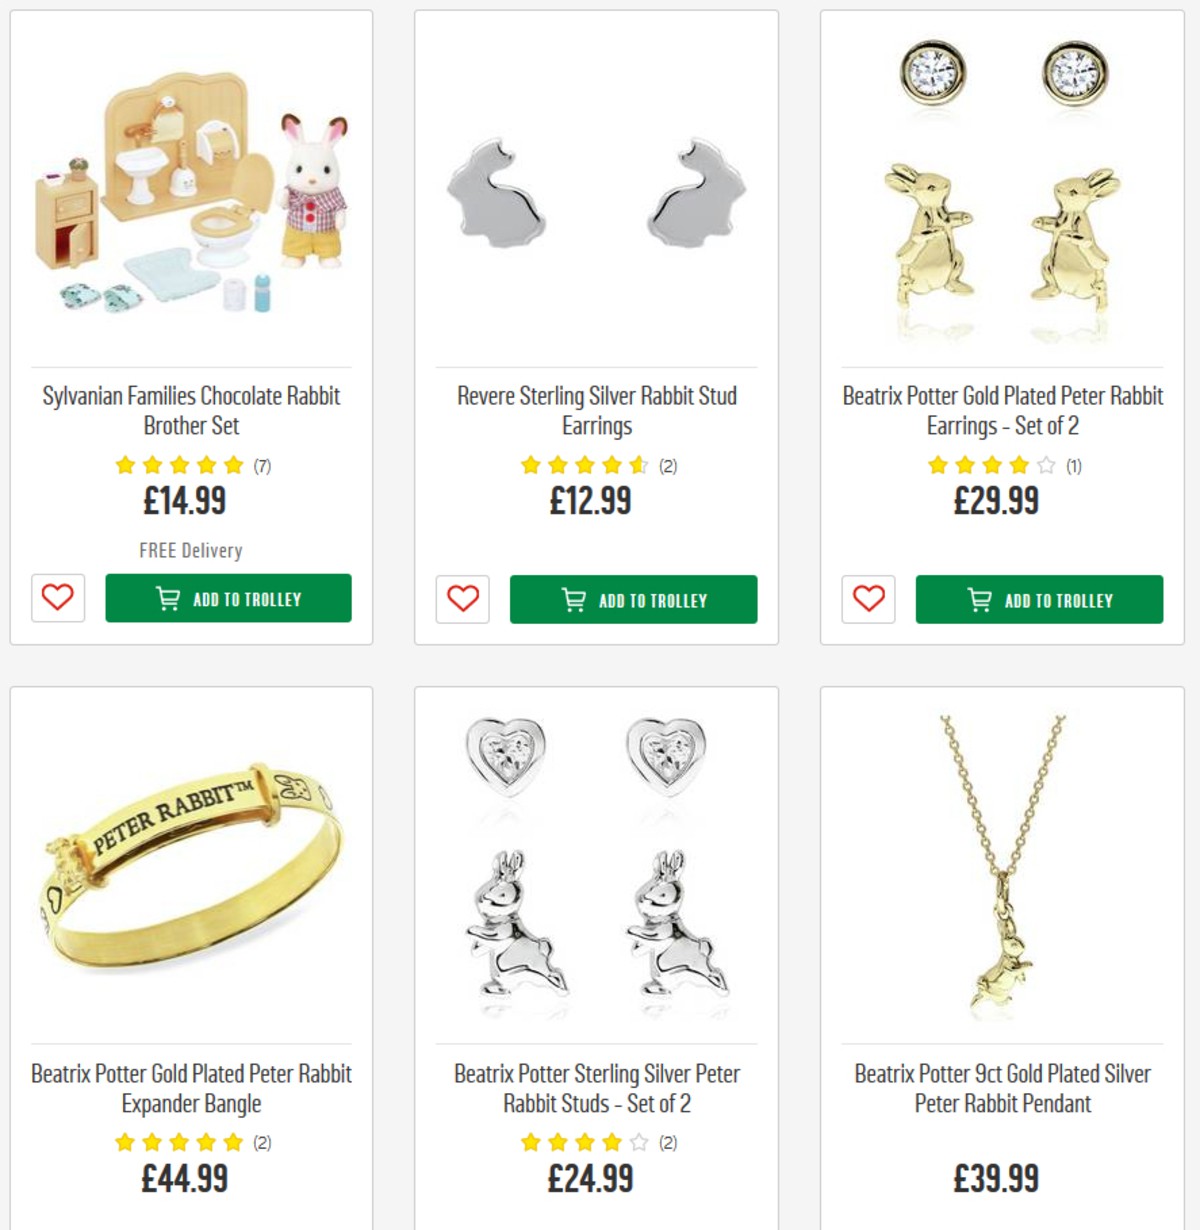 Argos Offers from 15 April